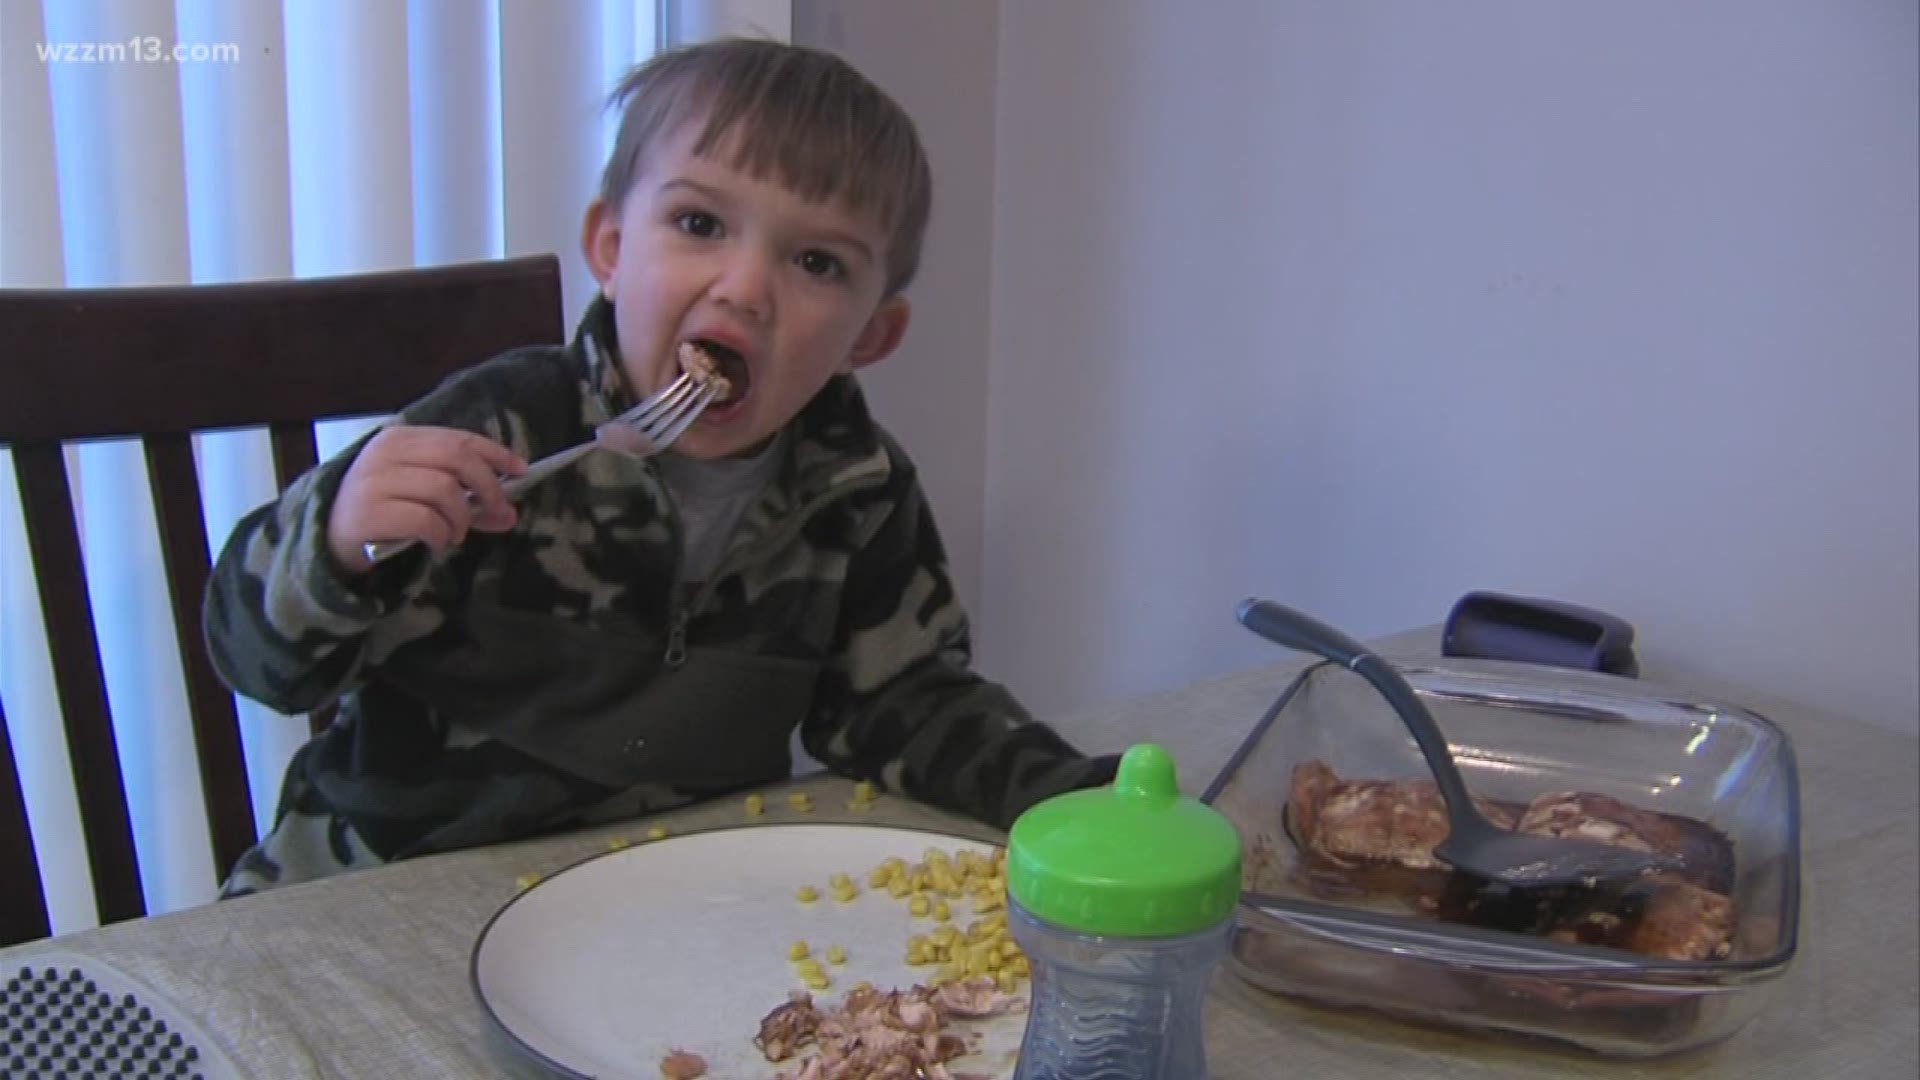 Picky eating may be genetic